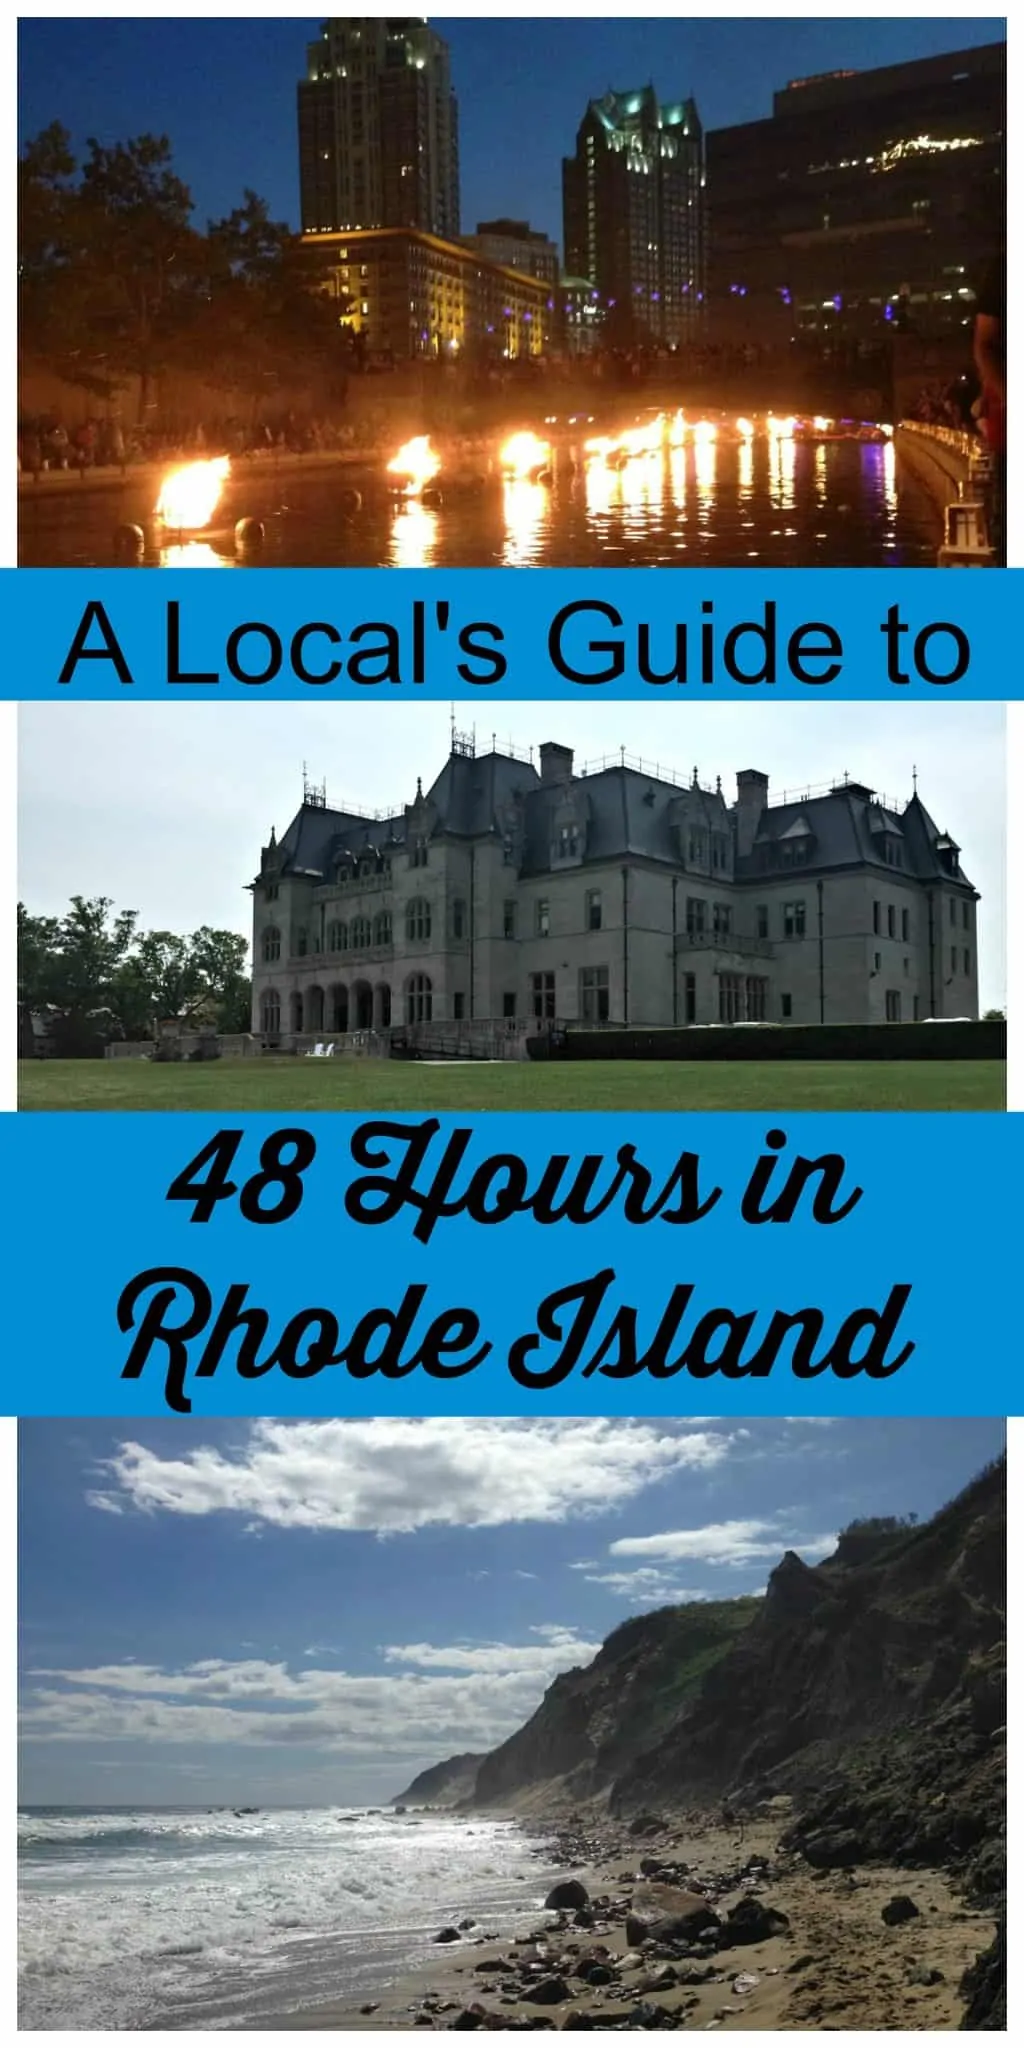 Spend 48 Hours in the smallest of the US States- Rhode Island. Experience our extensive coastline, gilded history and New England towns. #thingstodoinRhodeIsland #48HoursinRhodeIsland #ProvidenceRI #RI #USTravel #themidlifeperspective #TBIN